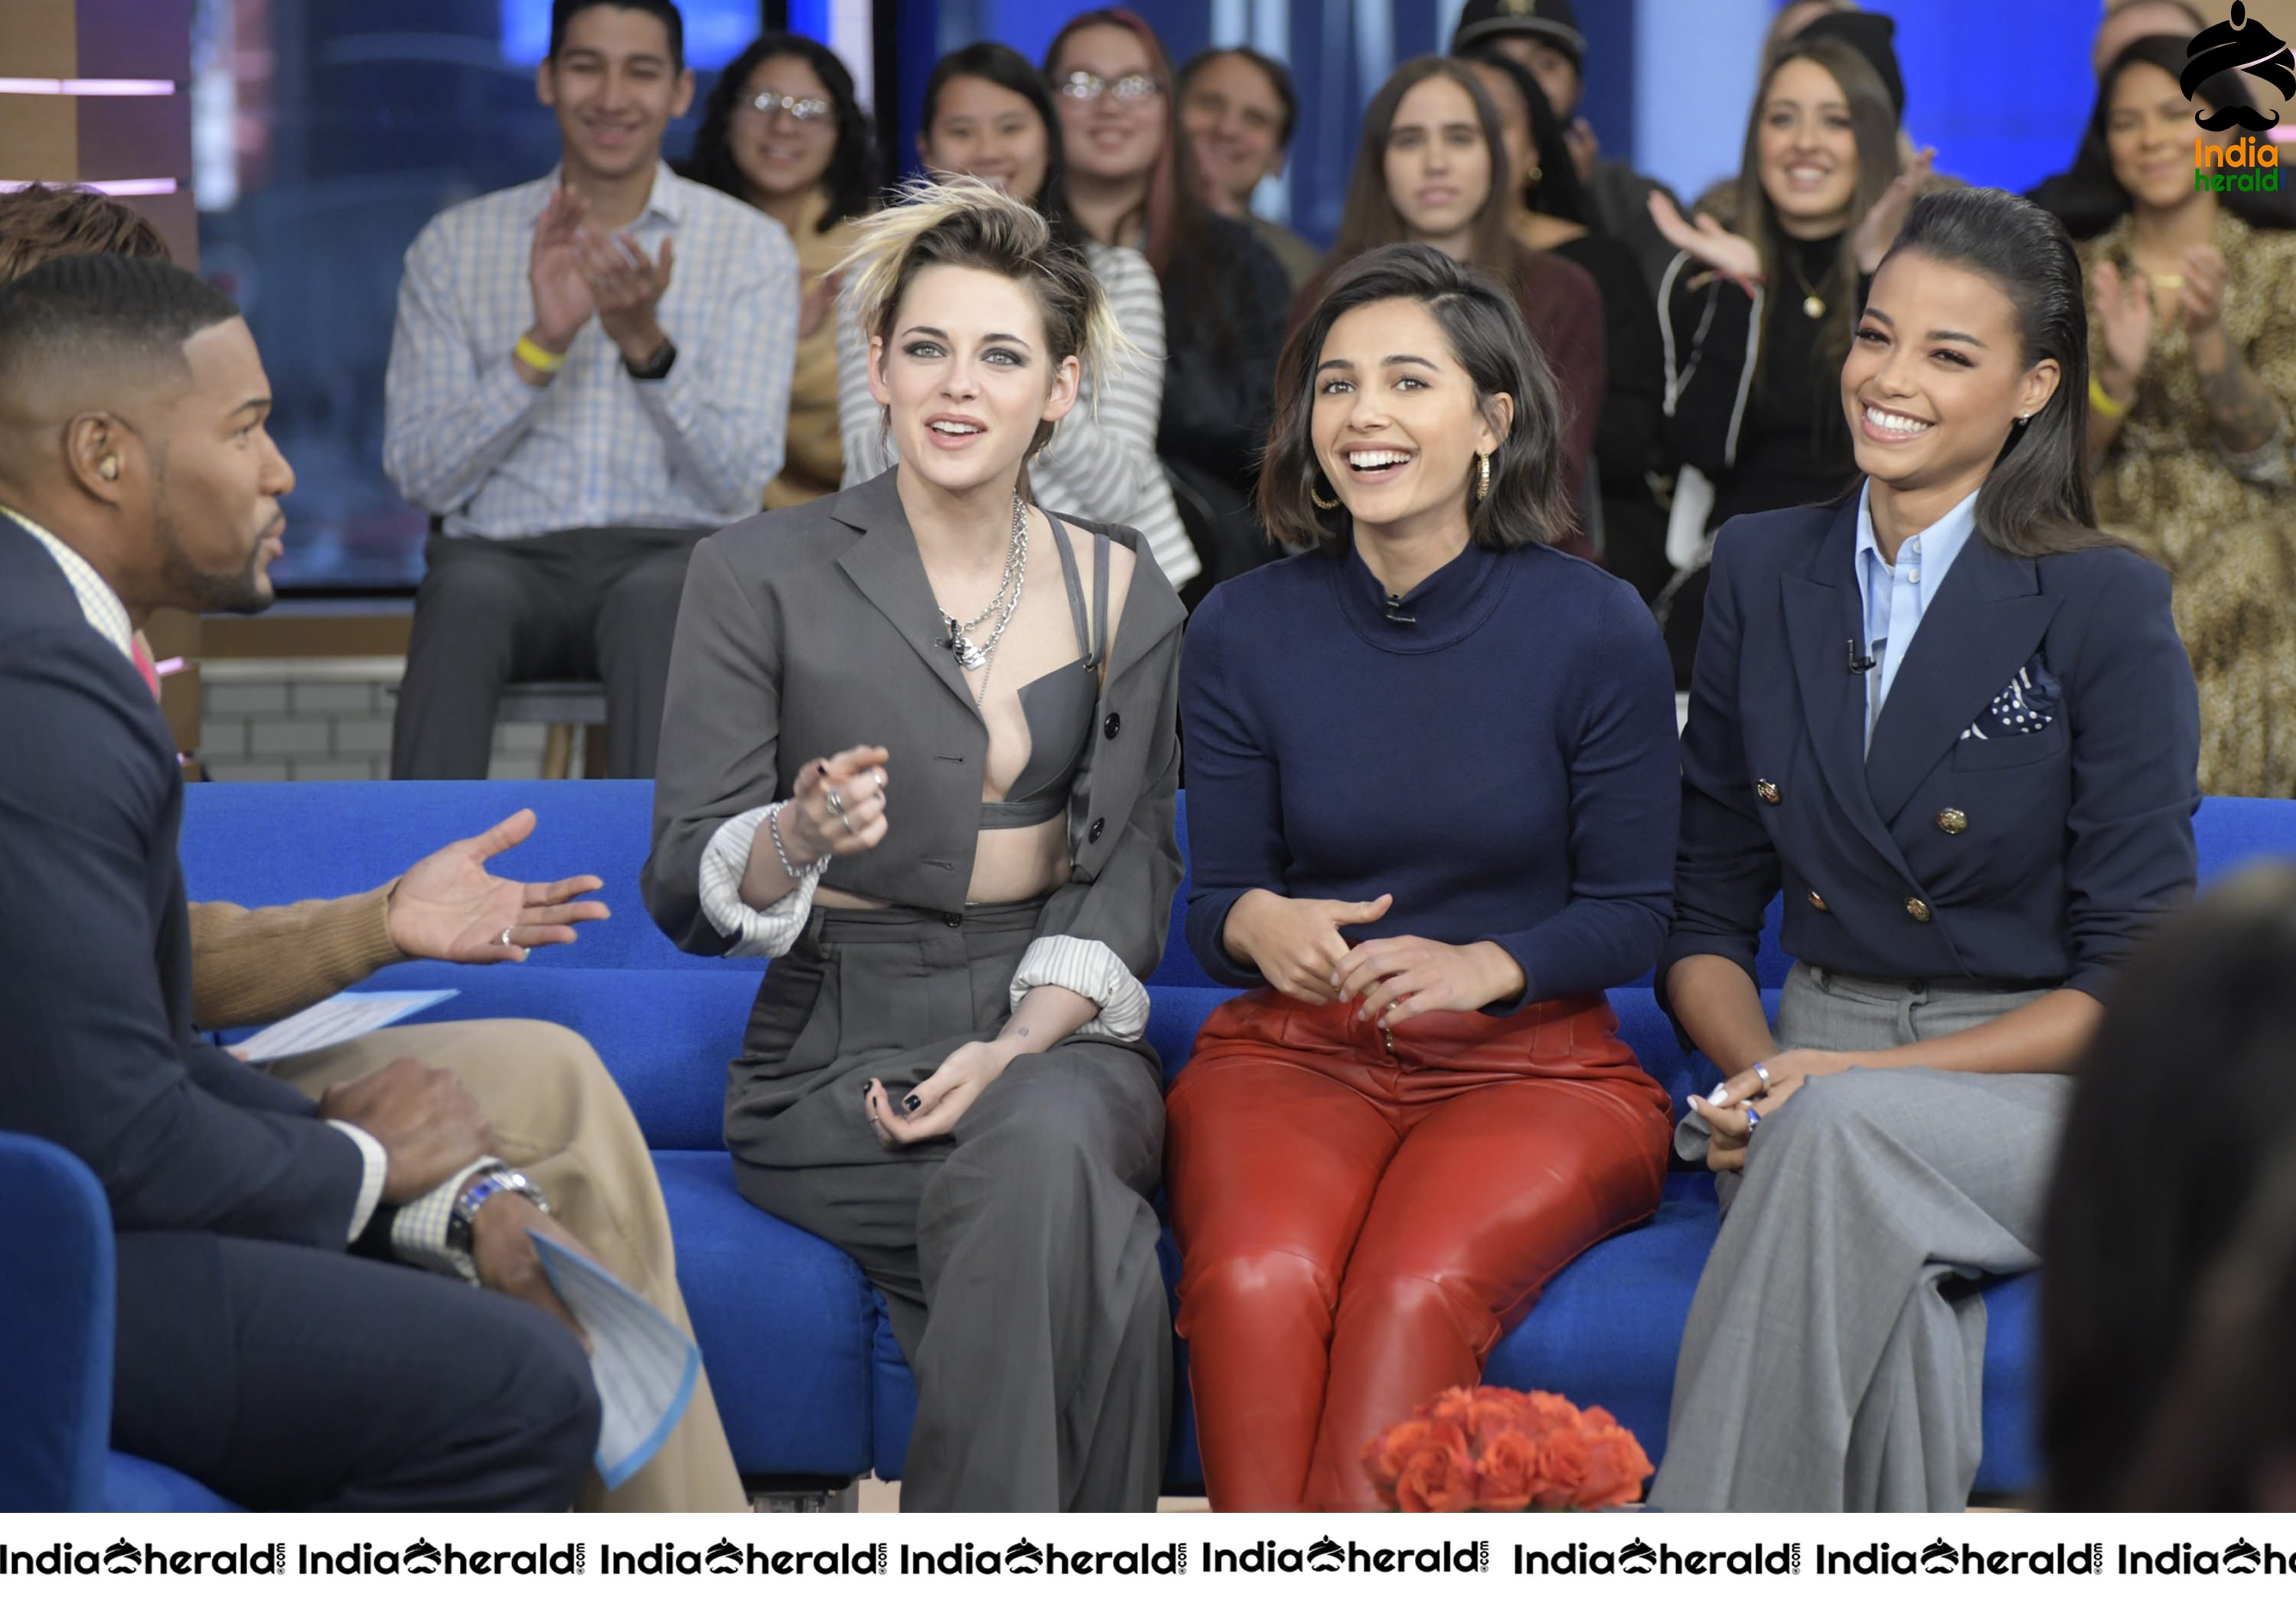 Charlies Angeles Actresses at Good Morning America Show